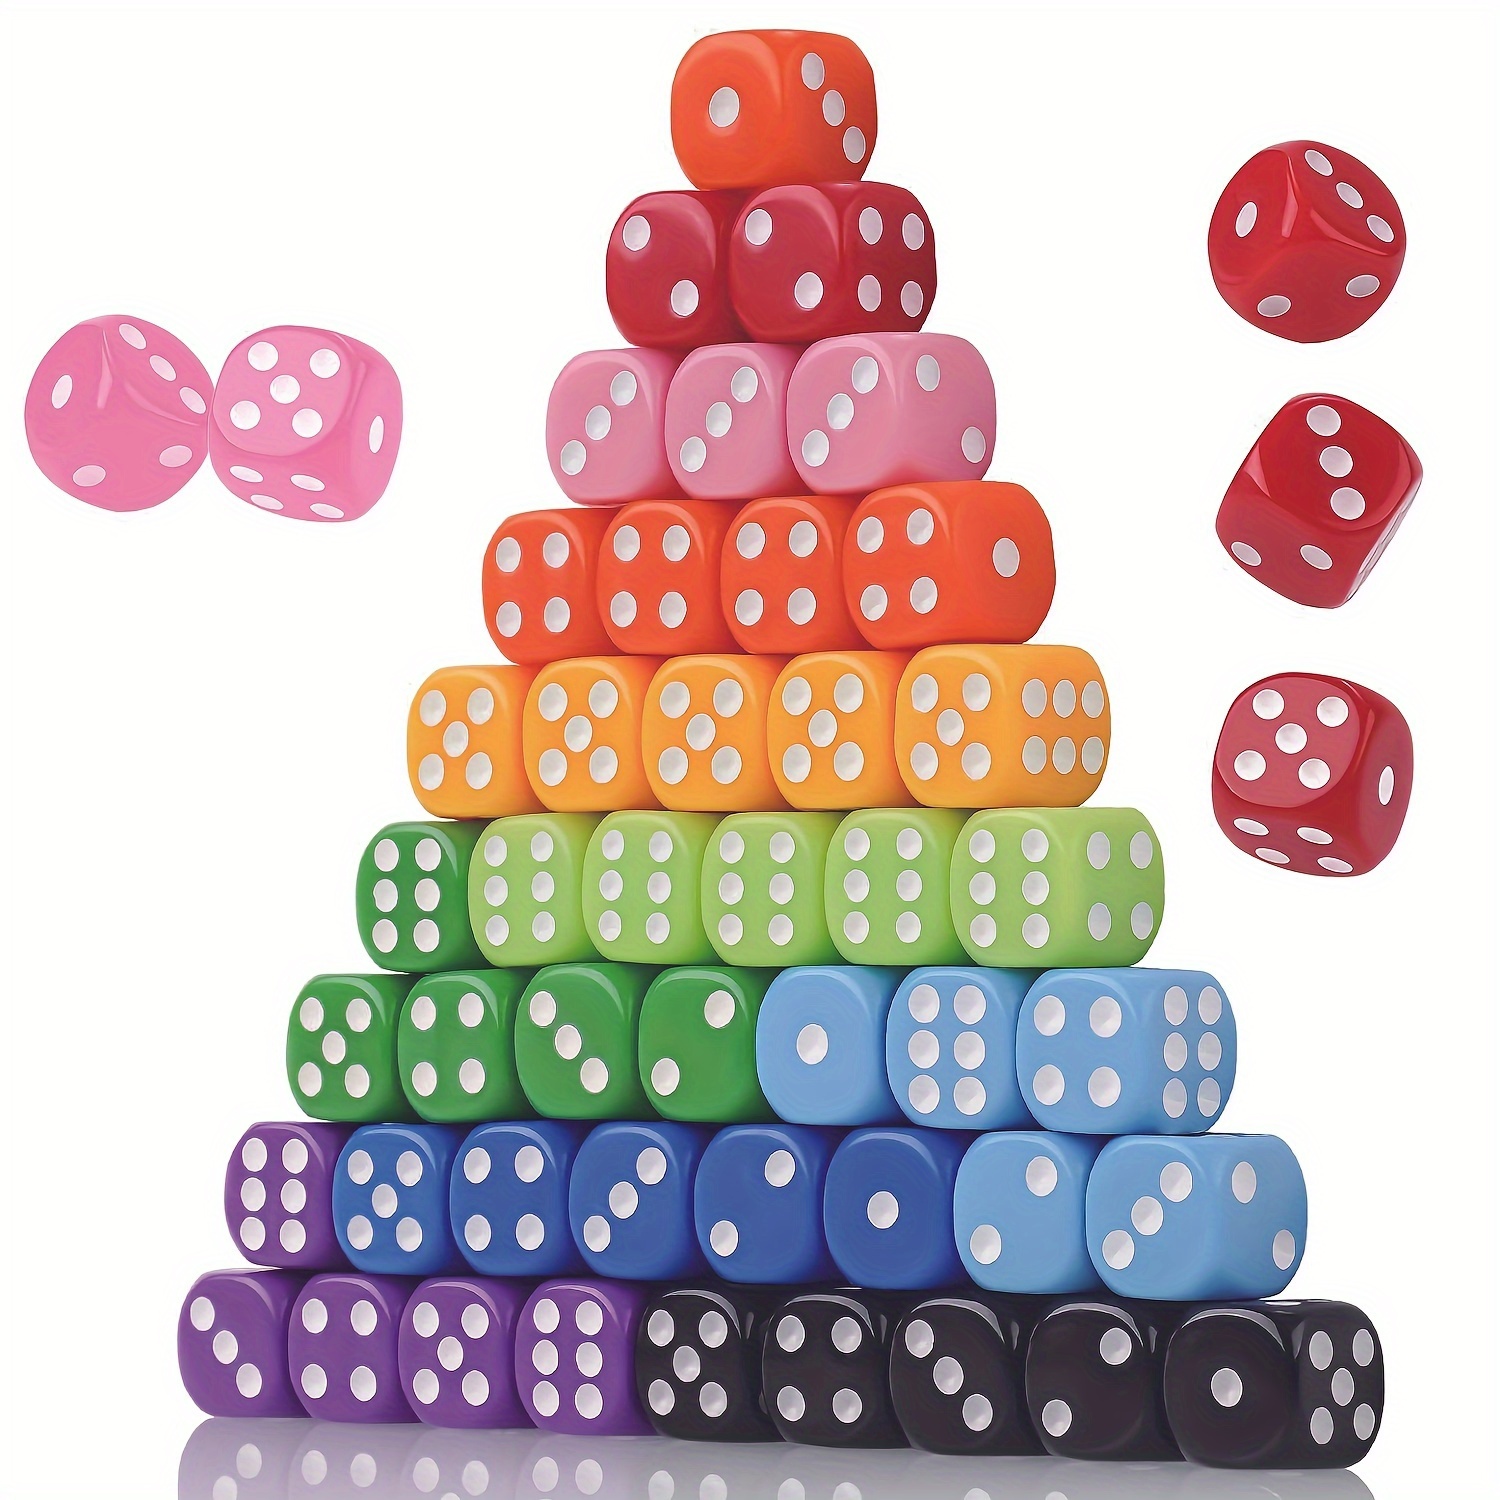 

20pcs, 16mm 6-sided Solid Color Round Corner Dices For Board Game, Holidays Party Family Gathering Game Dices